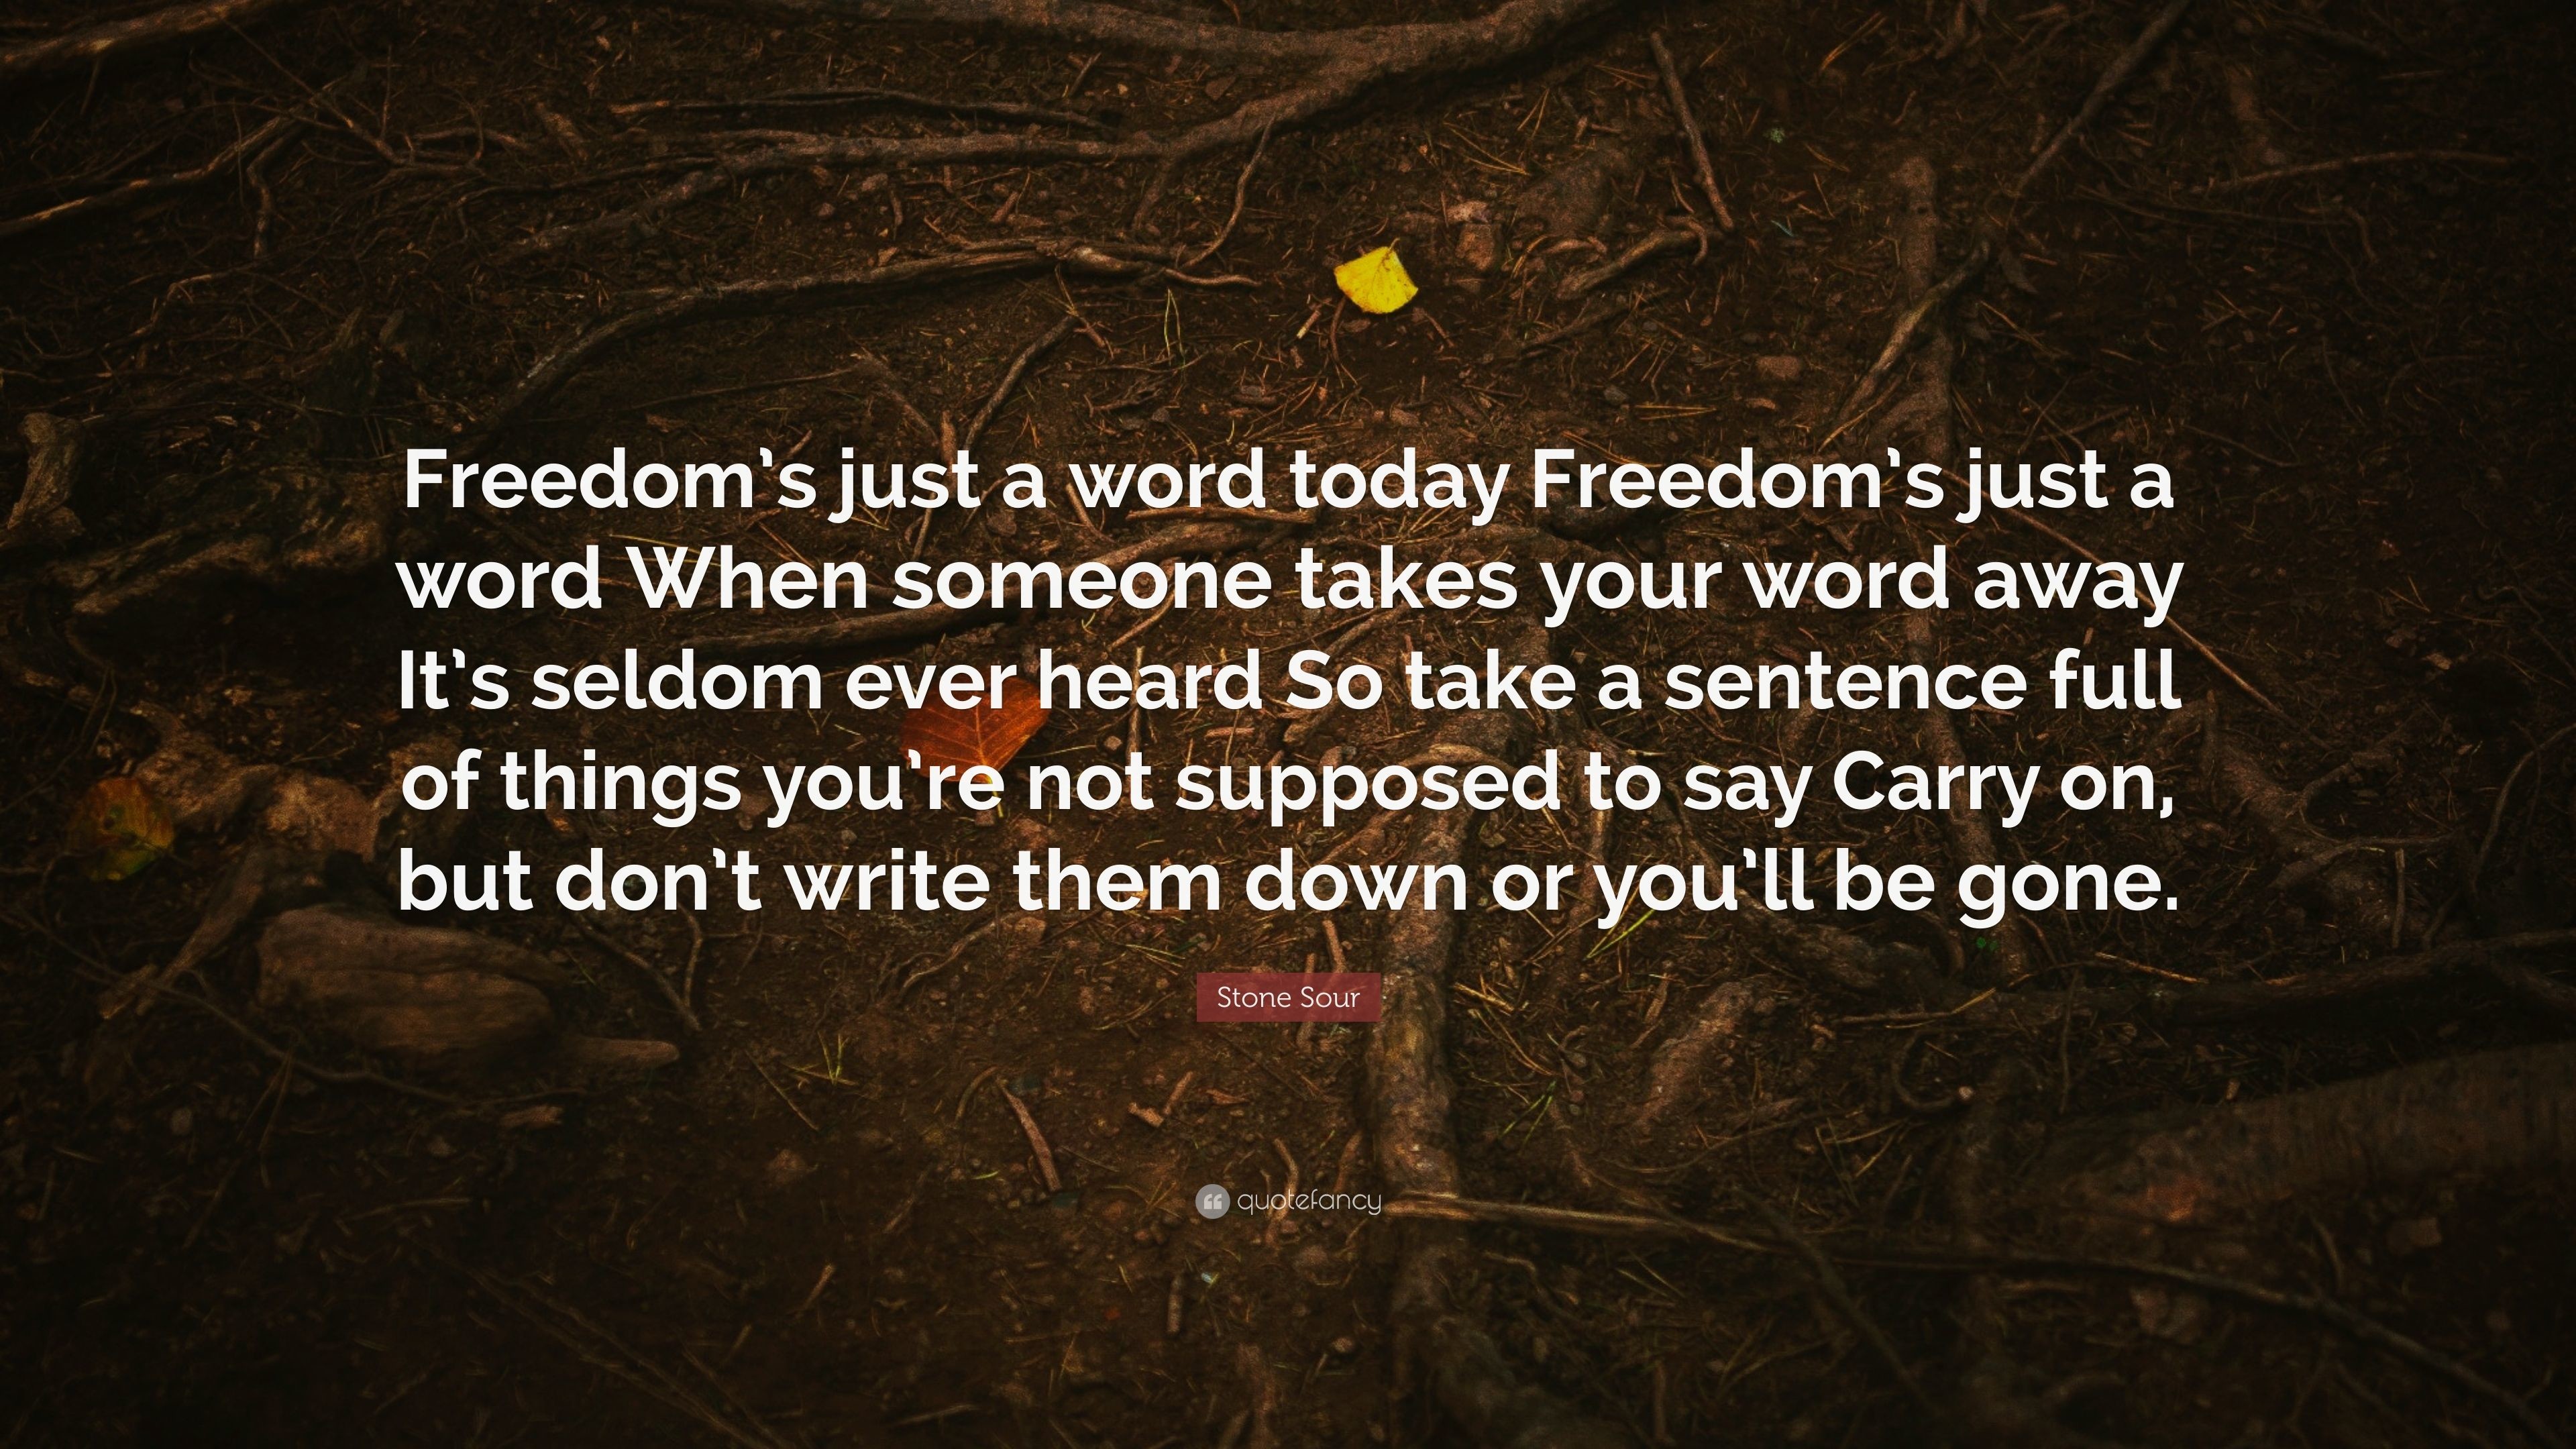 3840x2160 Stone Sour Quote: “Freedom's just a word today Freedom's just a word When  someone